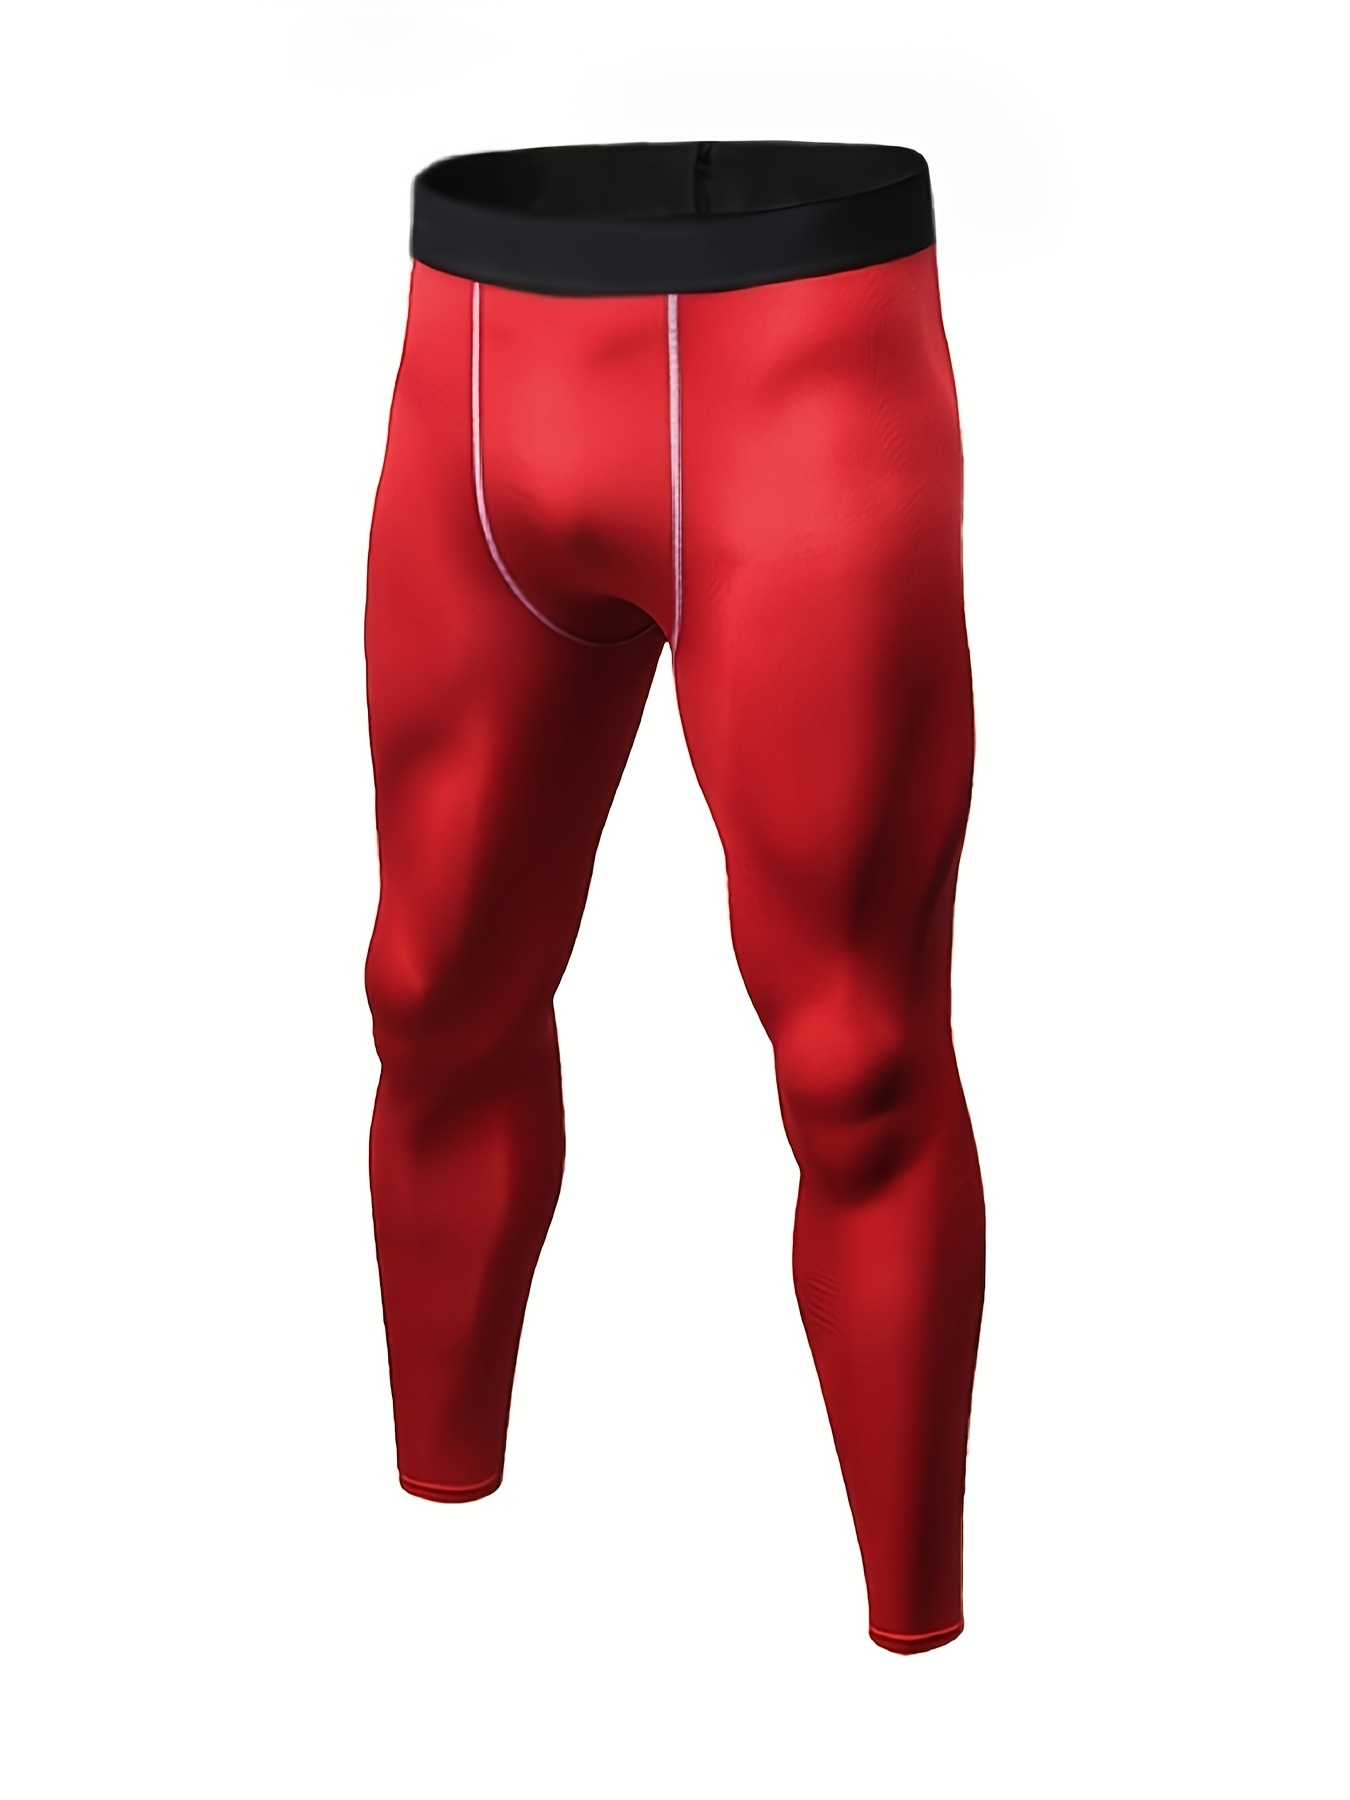 Buy DECISIVE Fitness Compression Tight Pants Base Layer Gym Leggings with  Vest for Men - Combo Set (Small, RED-Black) at